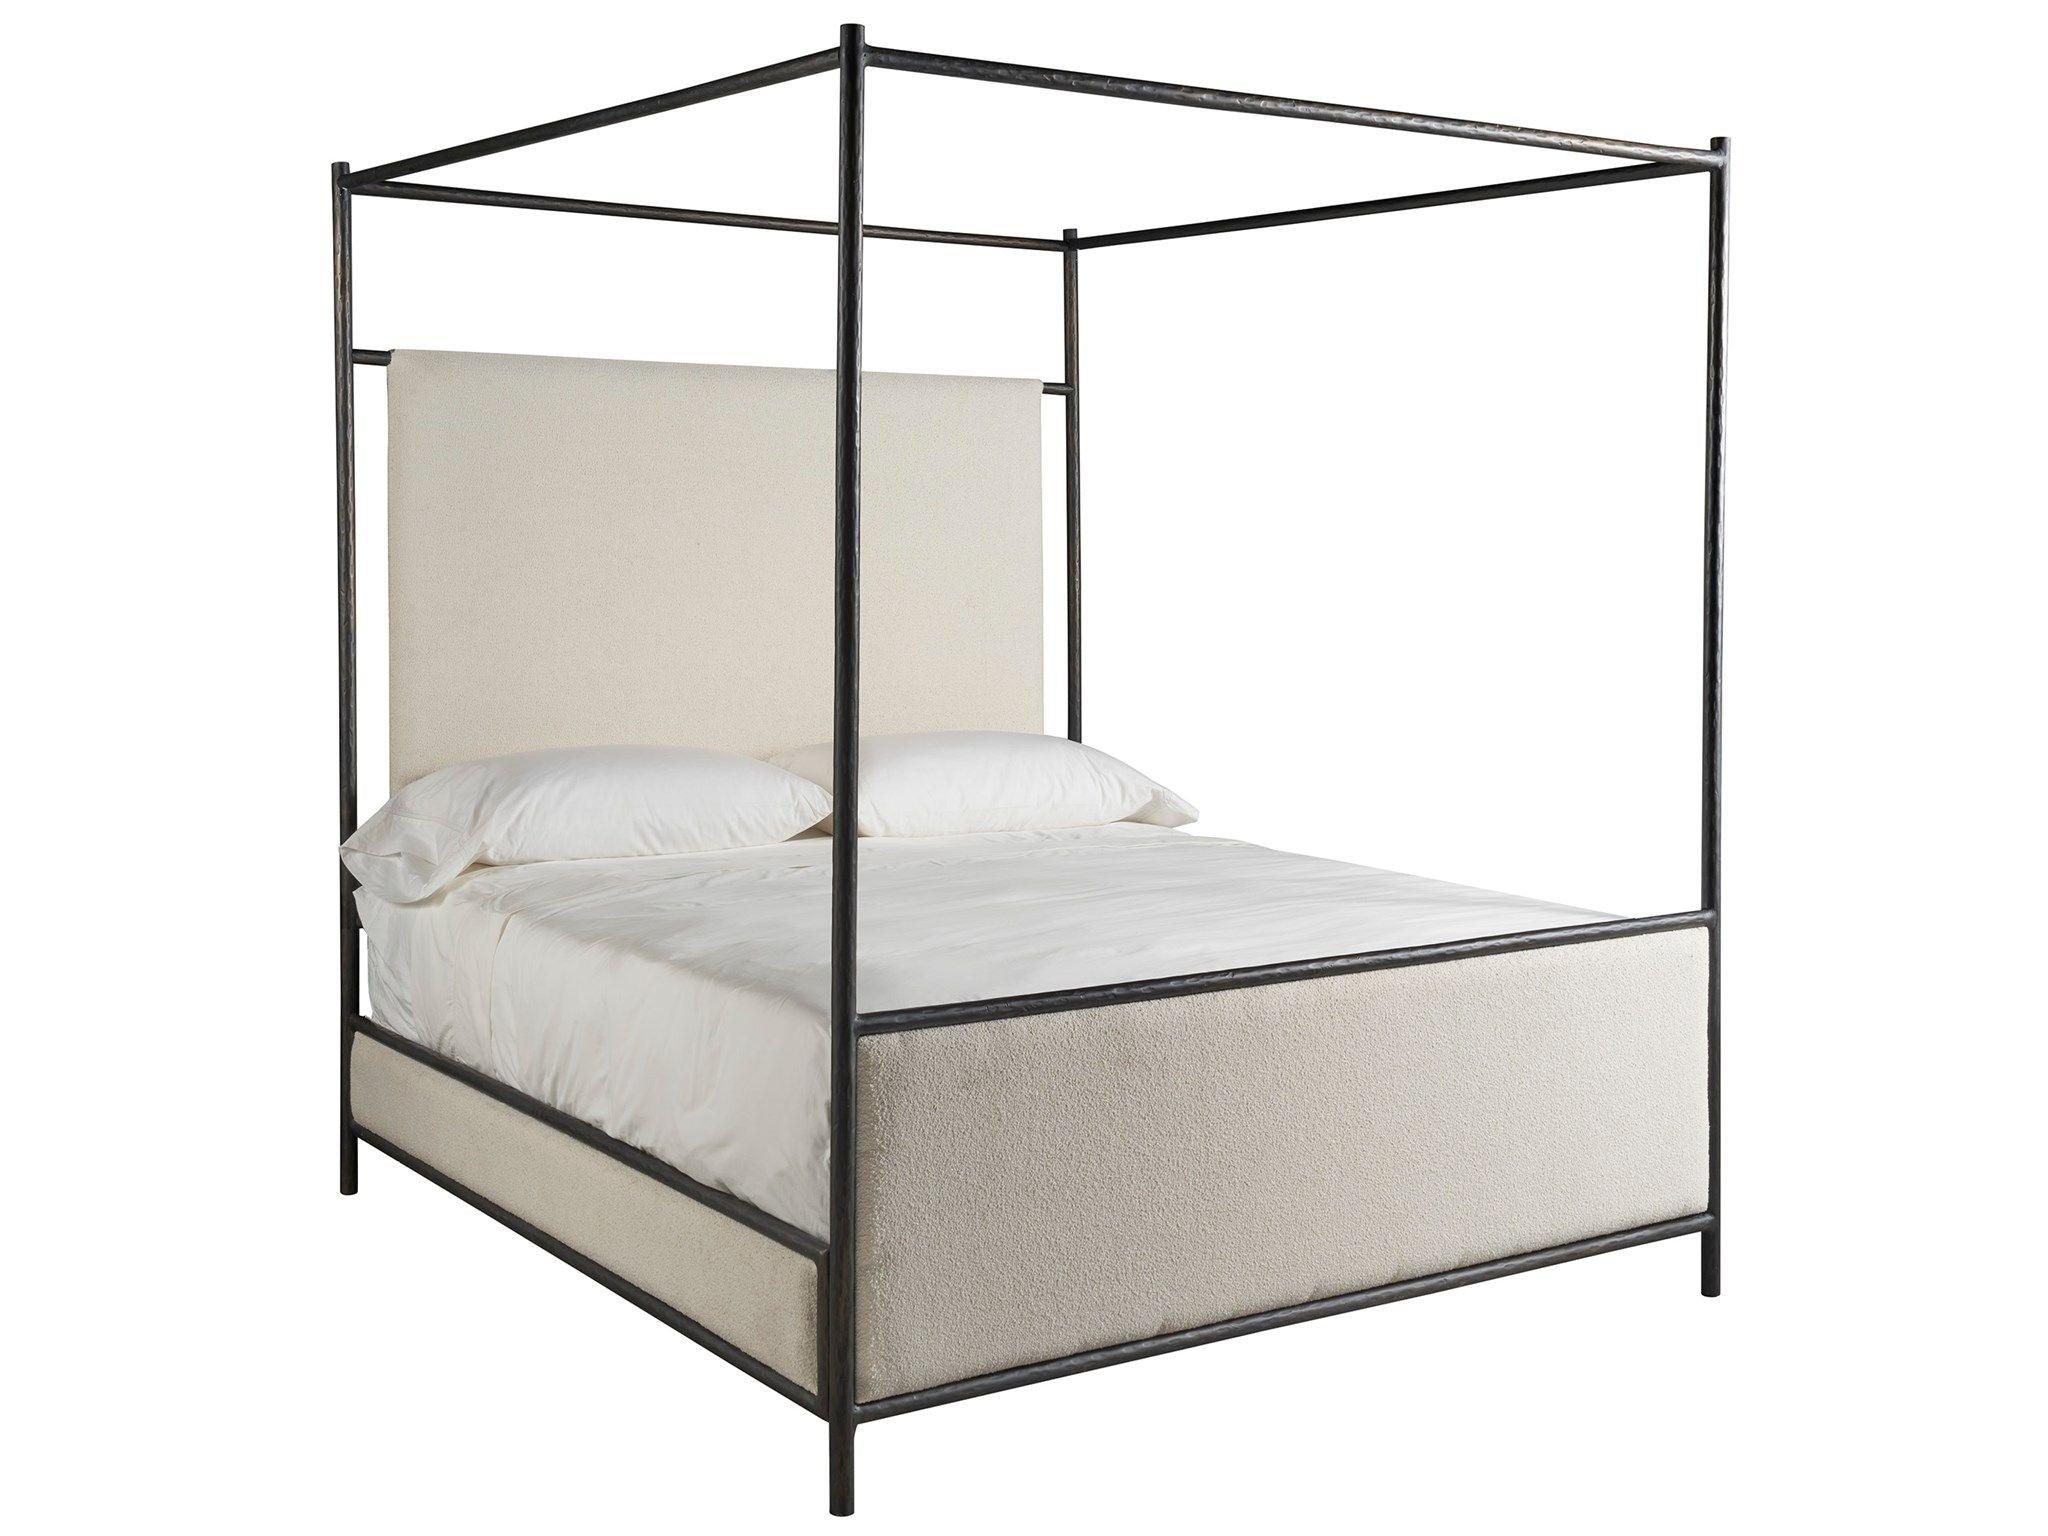 Universal Furniture - New Modern - Cascade King Canopy Bed - White - 5th Avenue Furniture